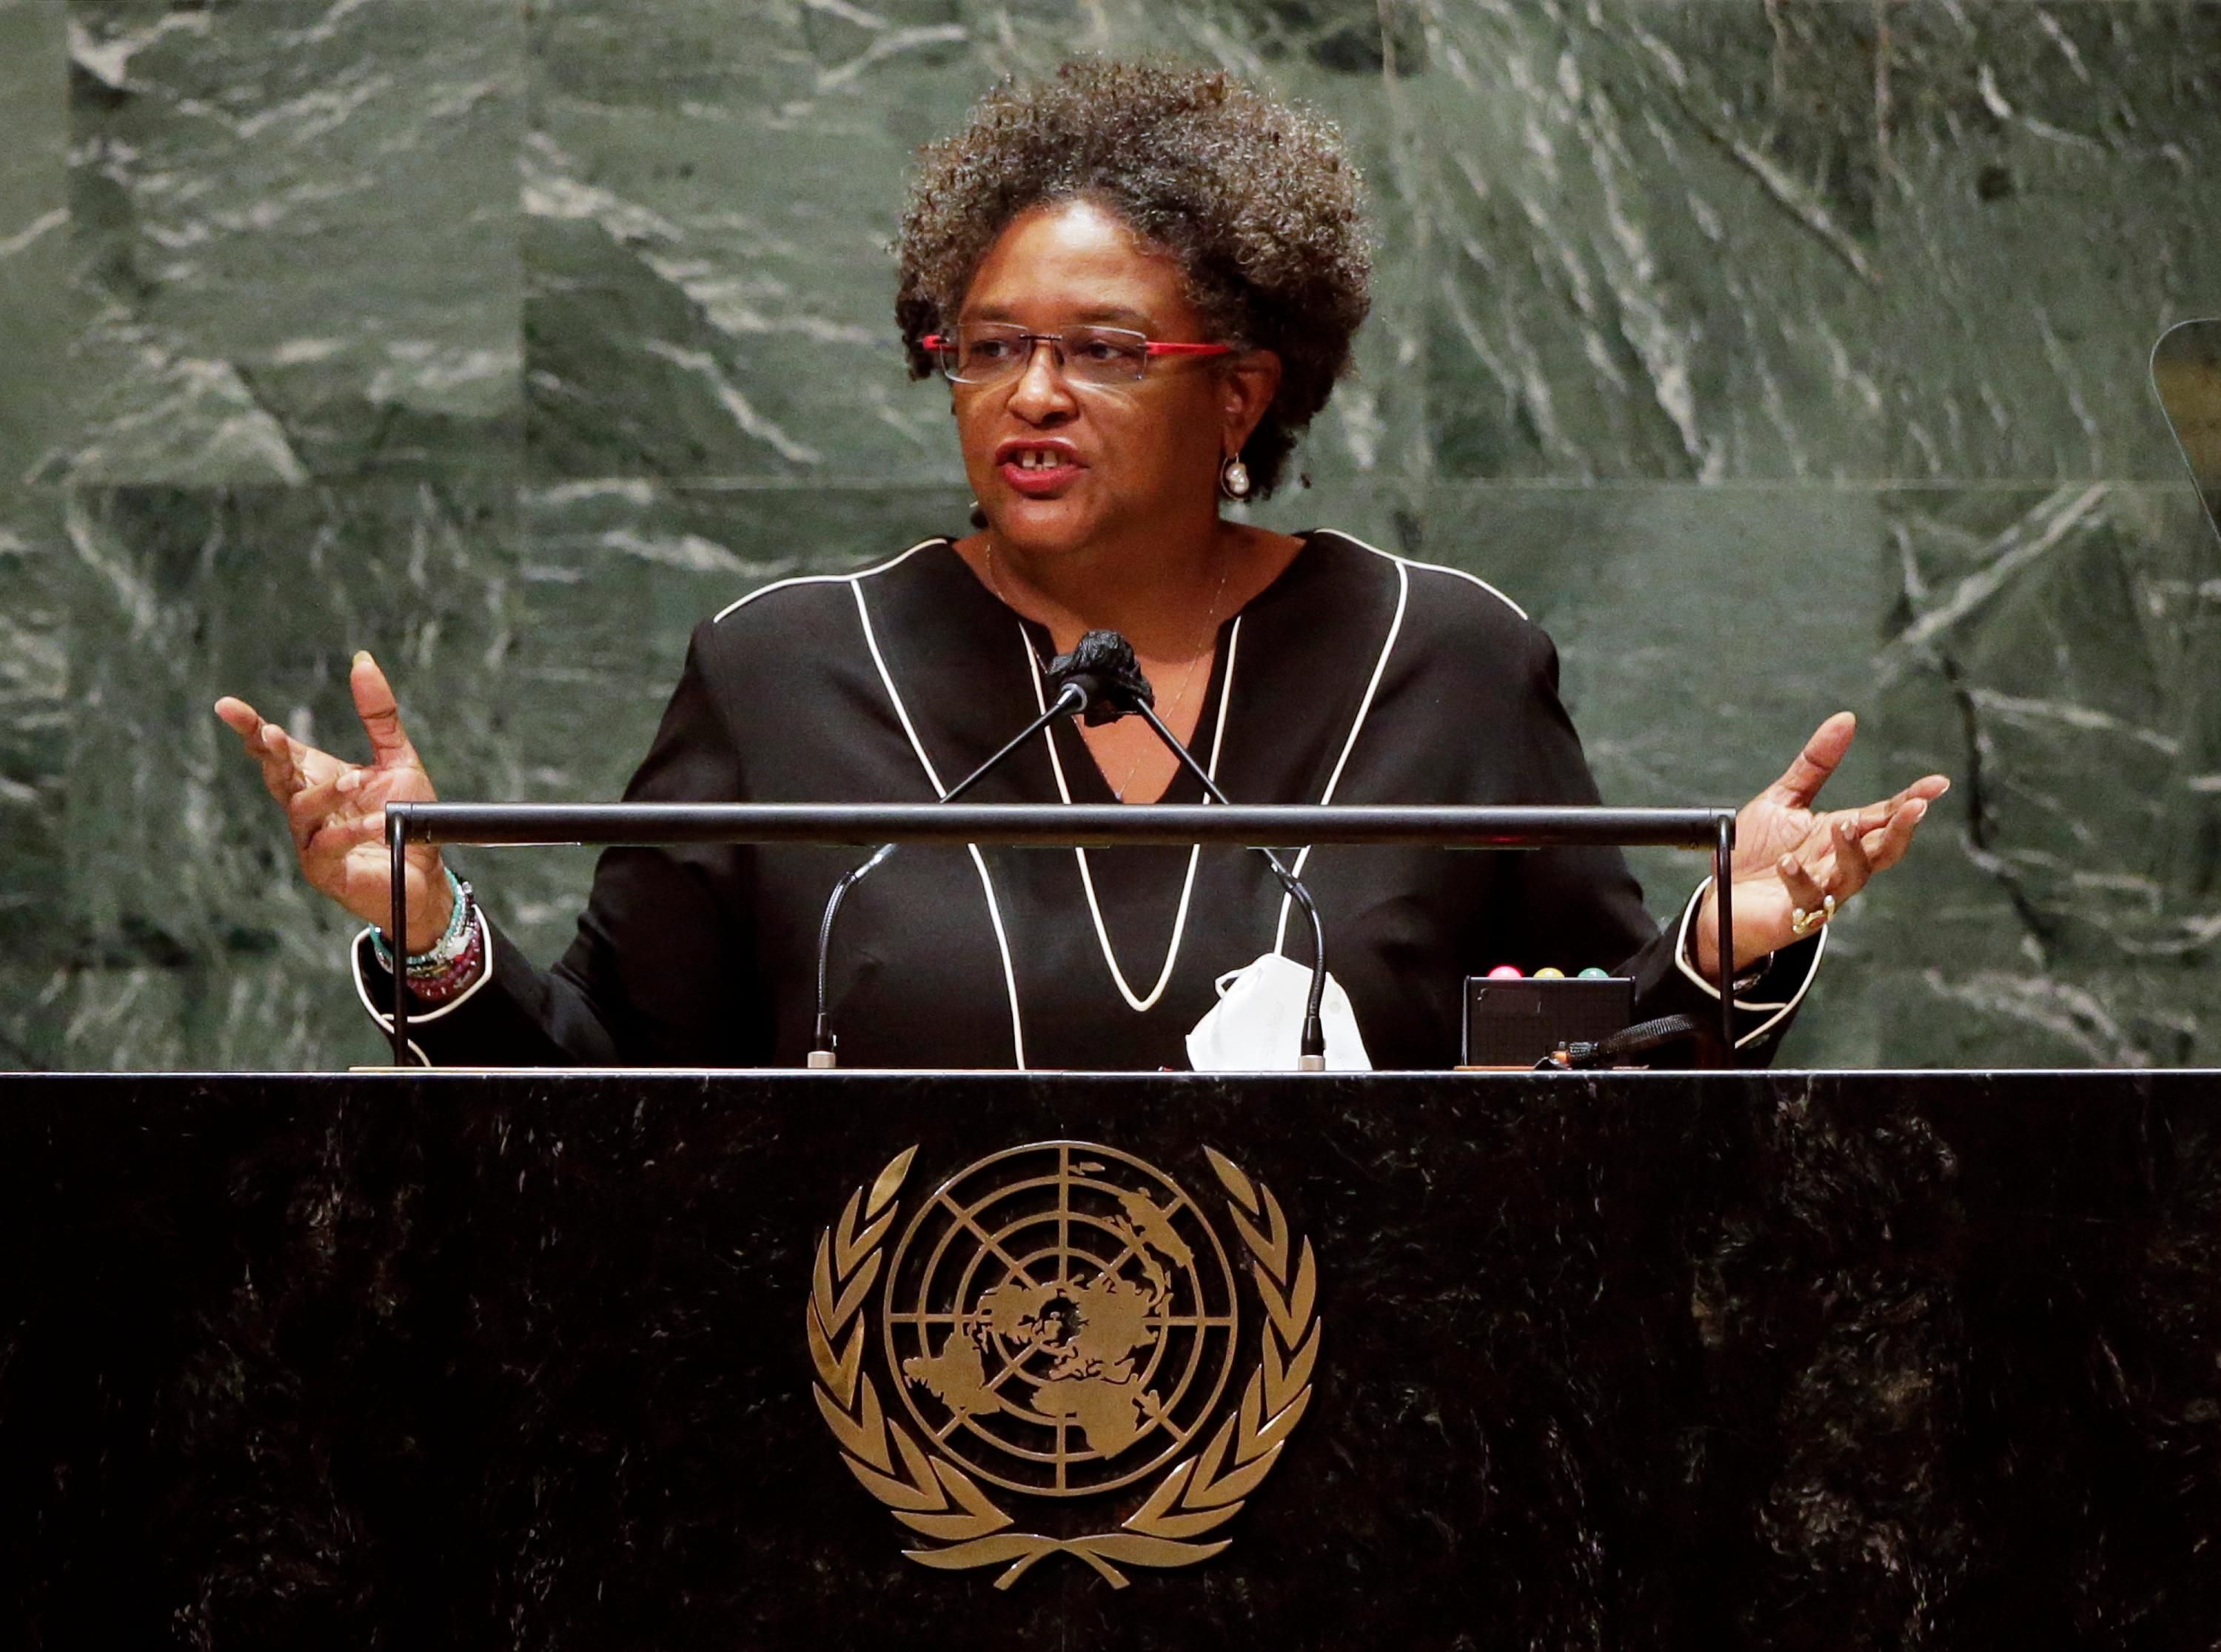 Barbados Prime Minister delivers a speech at the U.N. General Assembly